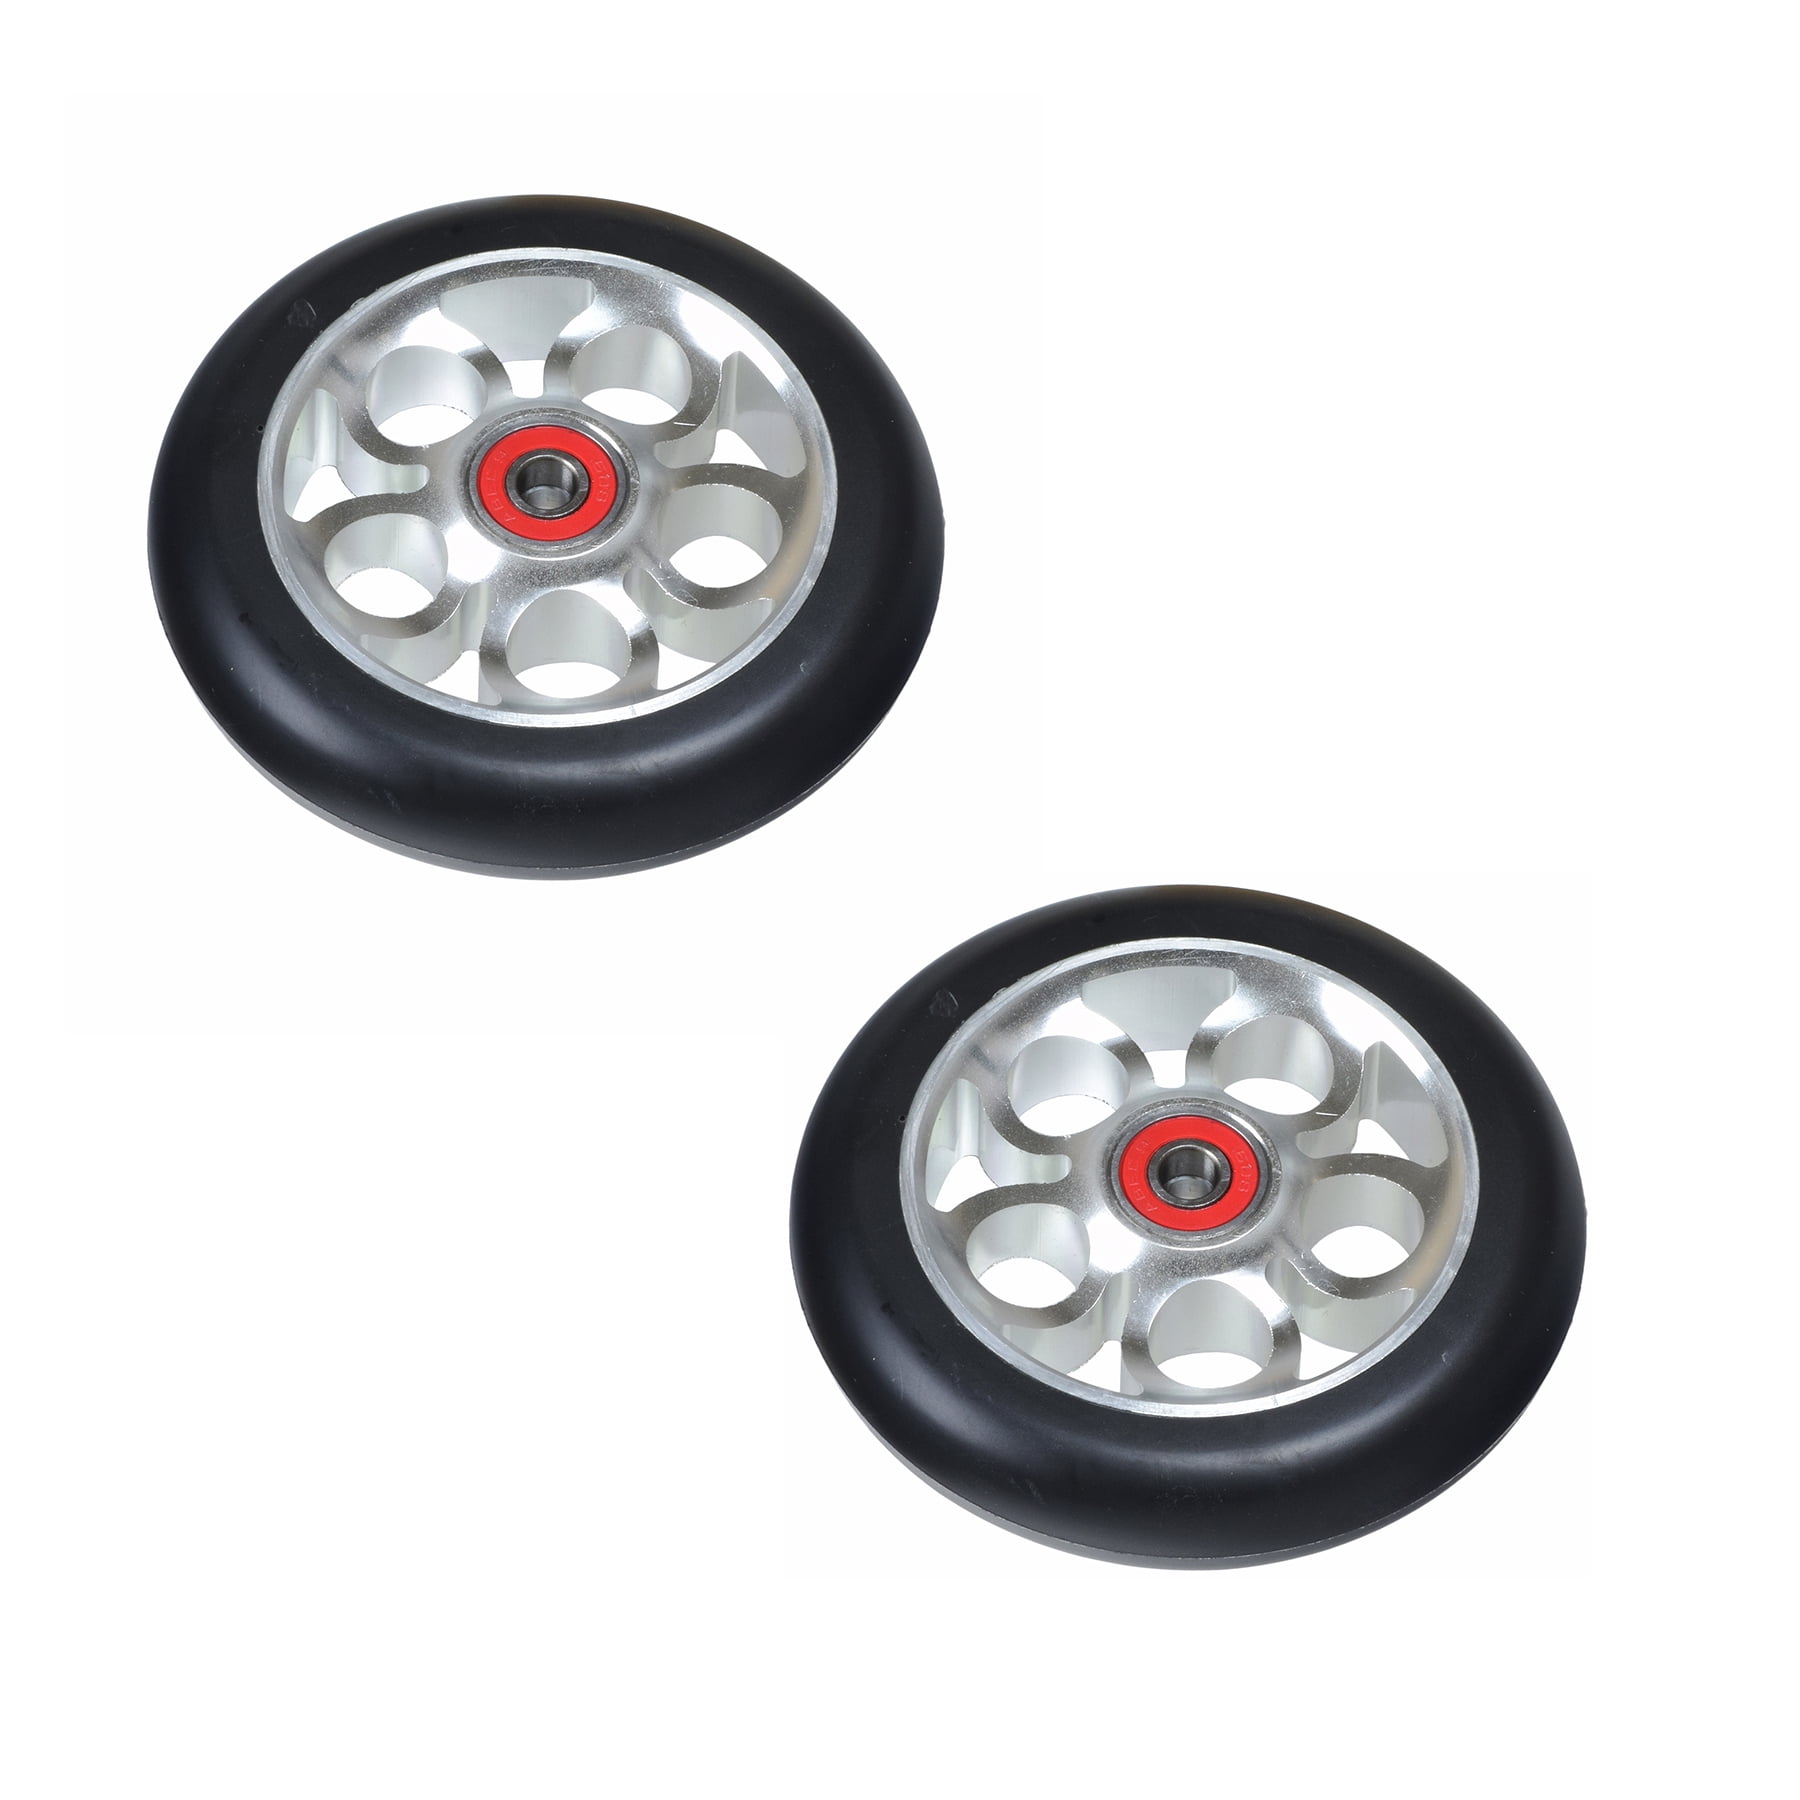 Here is The White/Grey Model from The Size is 100mm with a Durometer of 90a Bearings are Included. Kick Push This Listing is for a Set of Two Razor Scooter Wheels